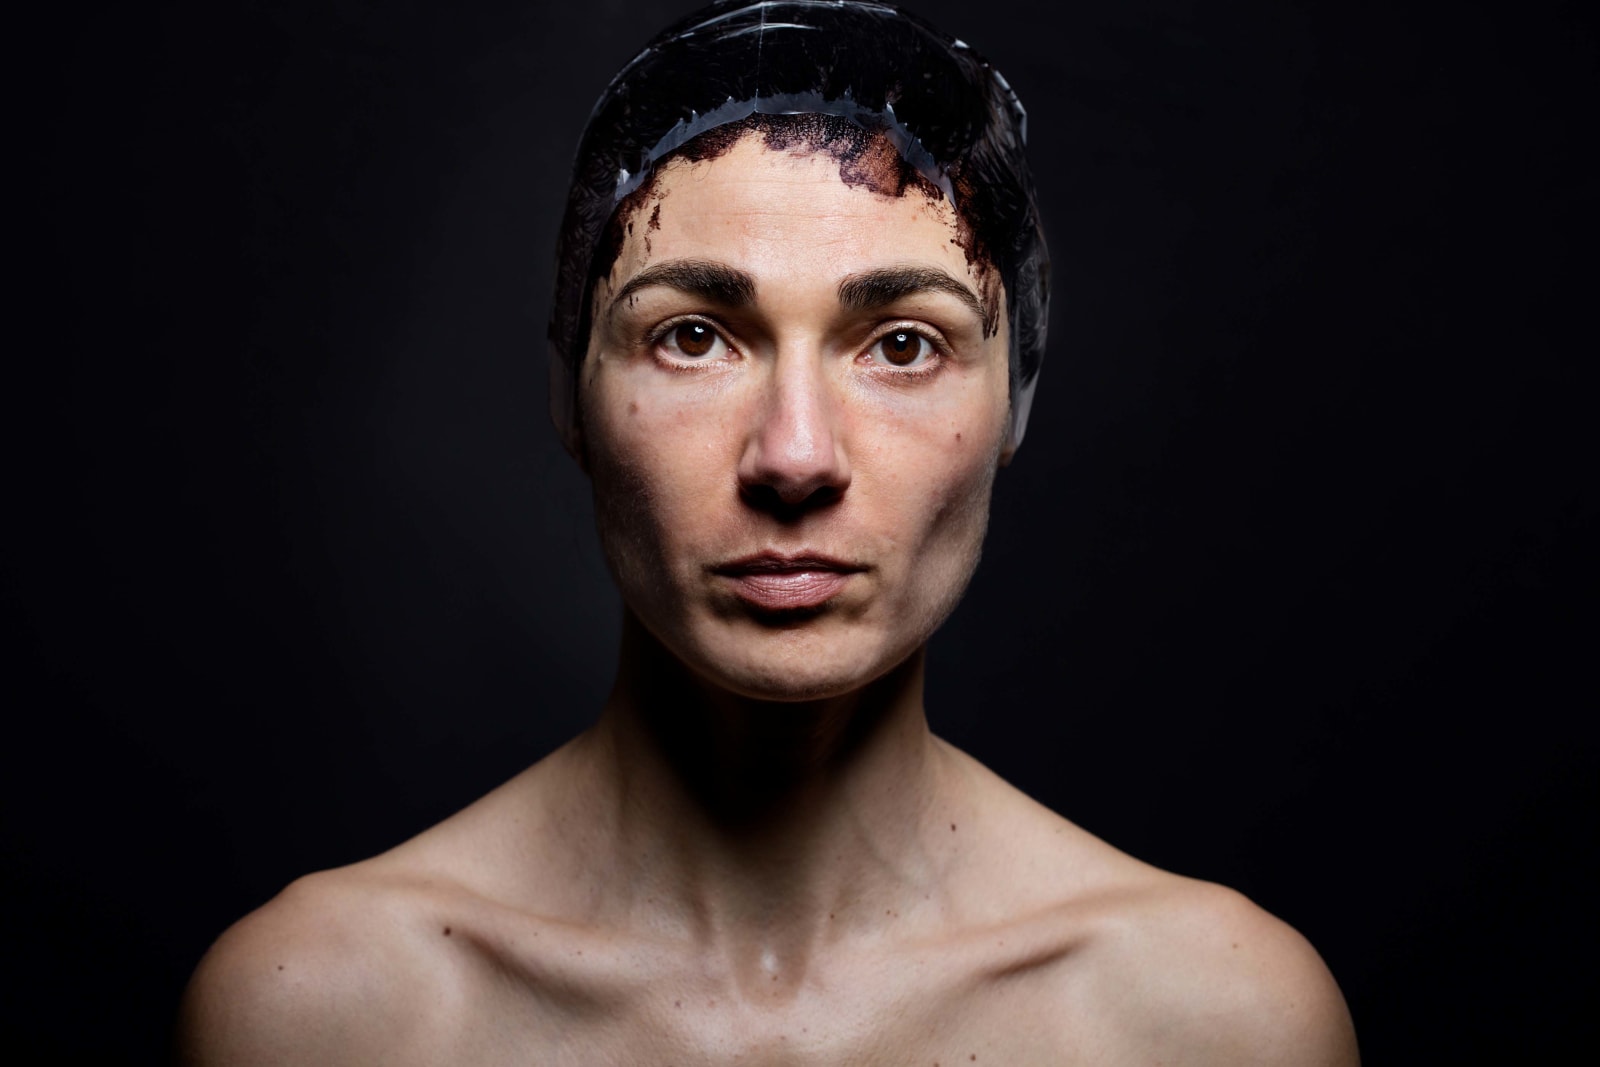 Elinor Carucci photograph portrait of the artist's face and shoulders against a black background with hair dye on her head